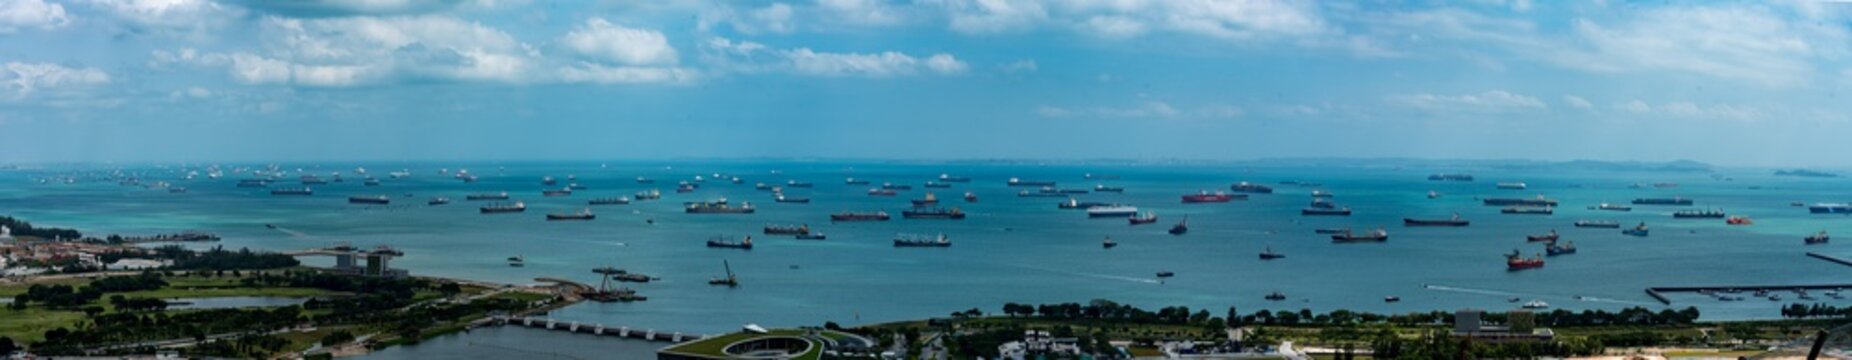 Ships waiting in Singapore harbor during COVID pandemic lockdown